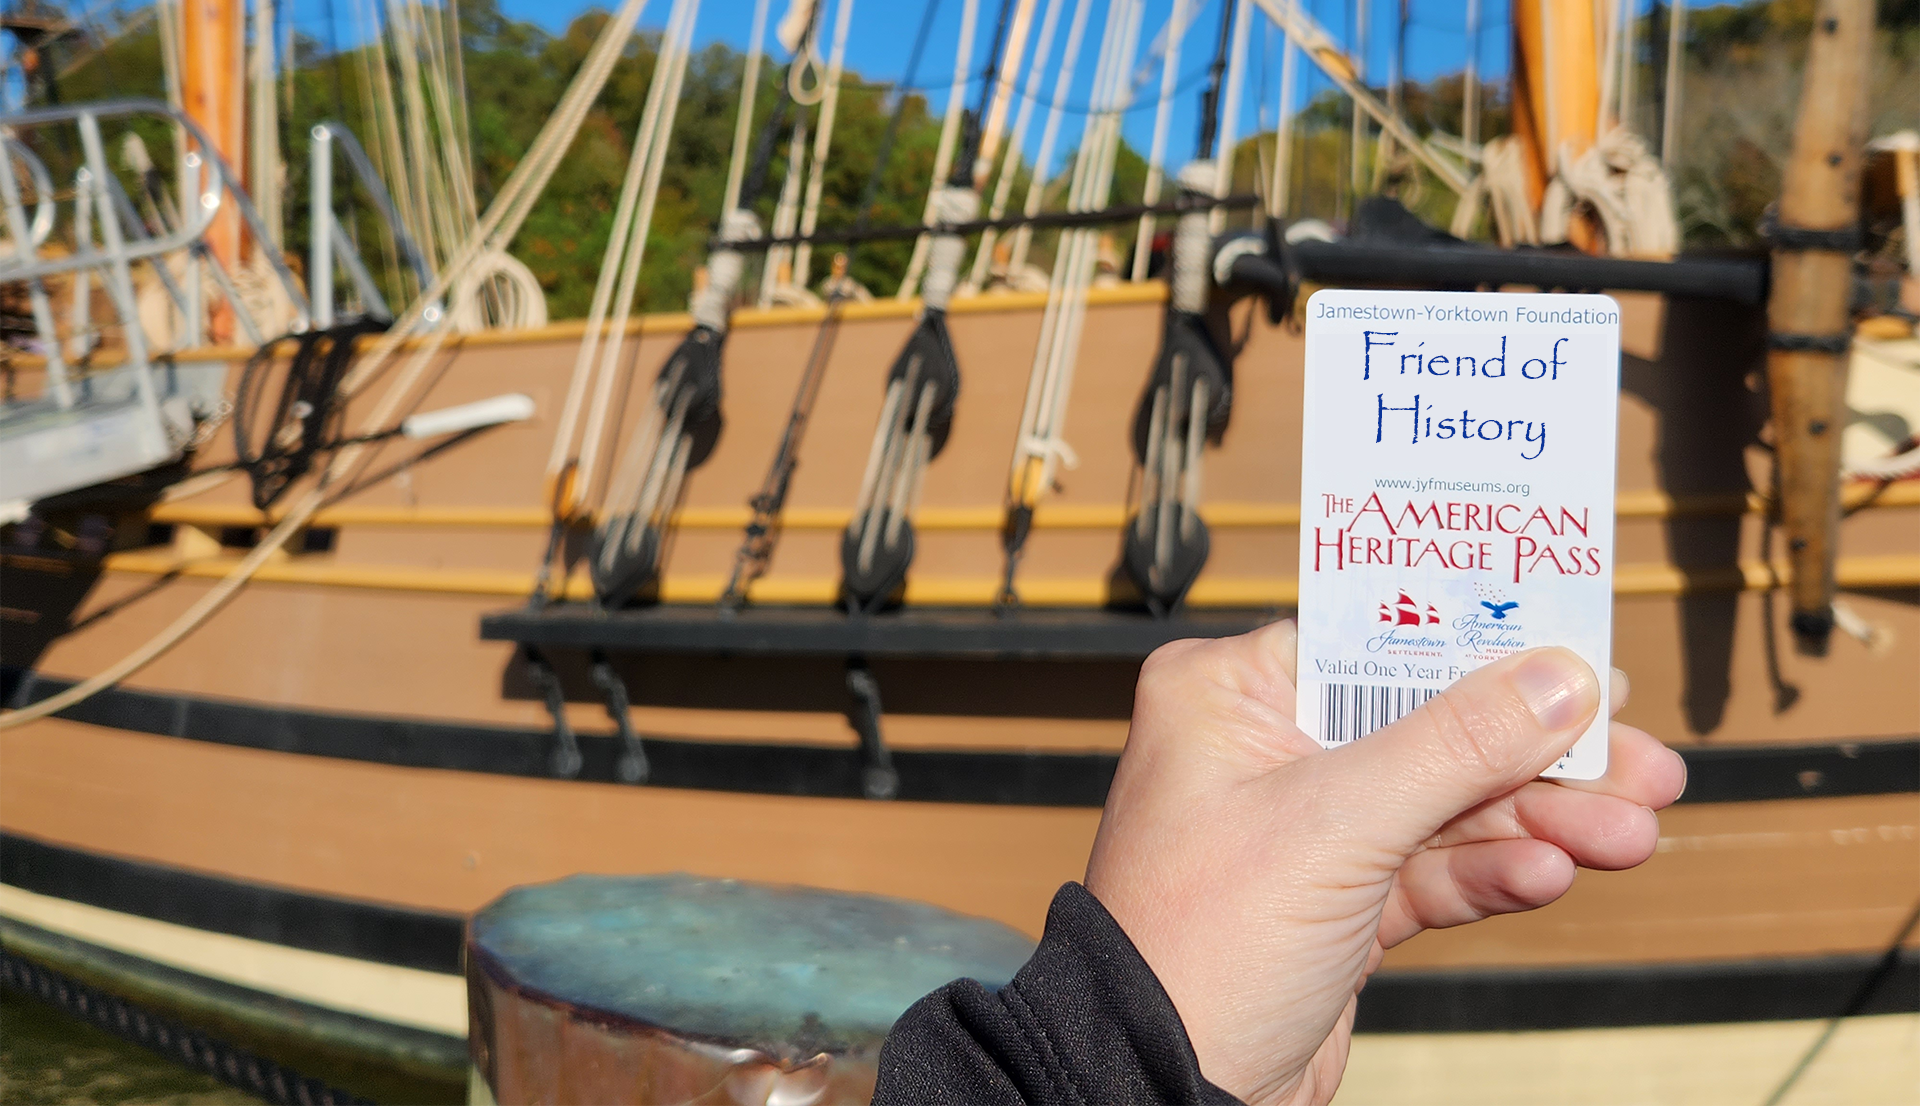 An Annual Pass being held in front of a ship